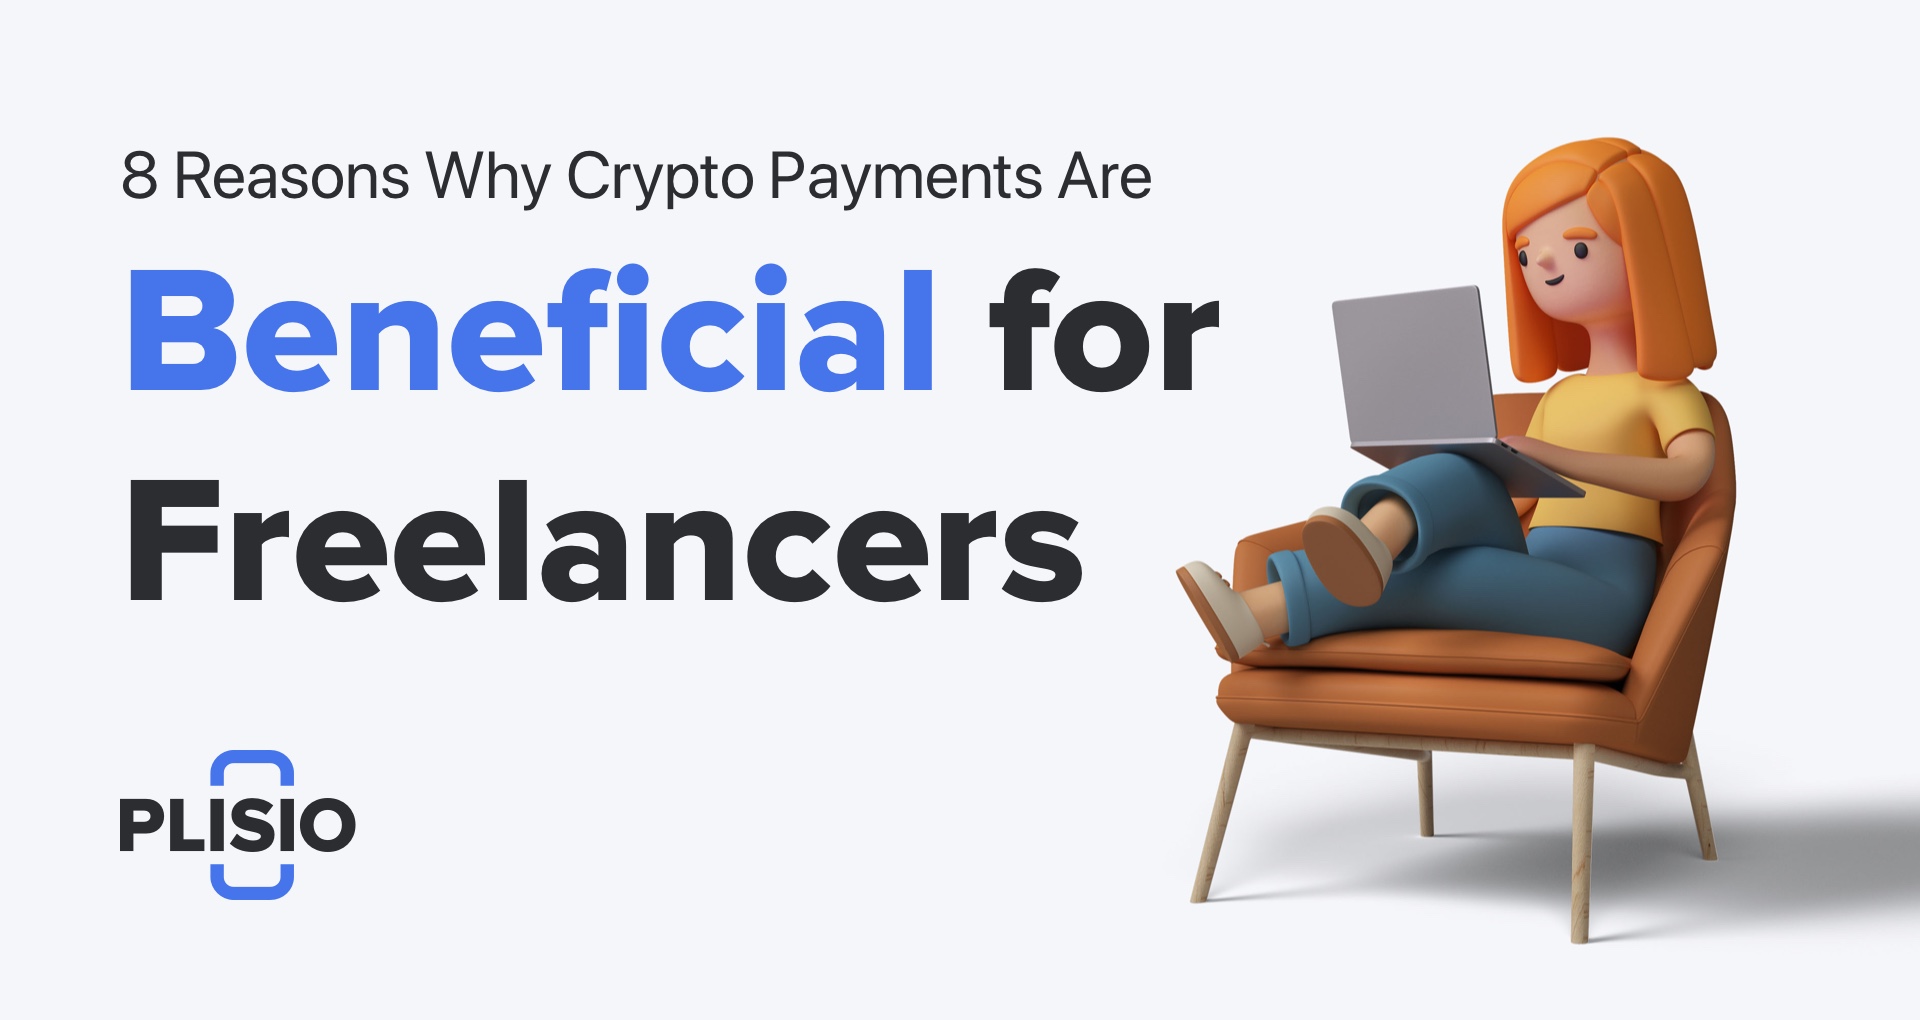 8 Reasons Why Crypto Payments Are Beneficial For Freelancers